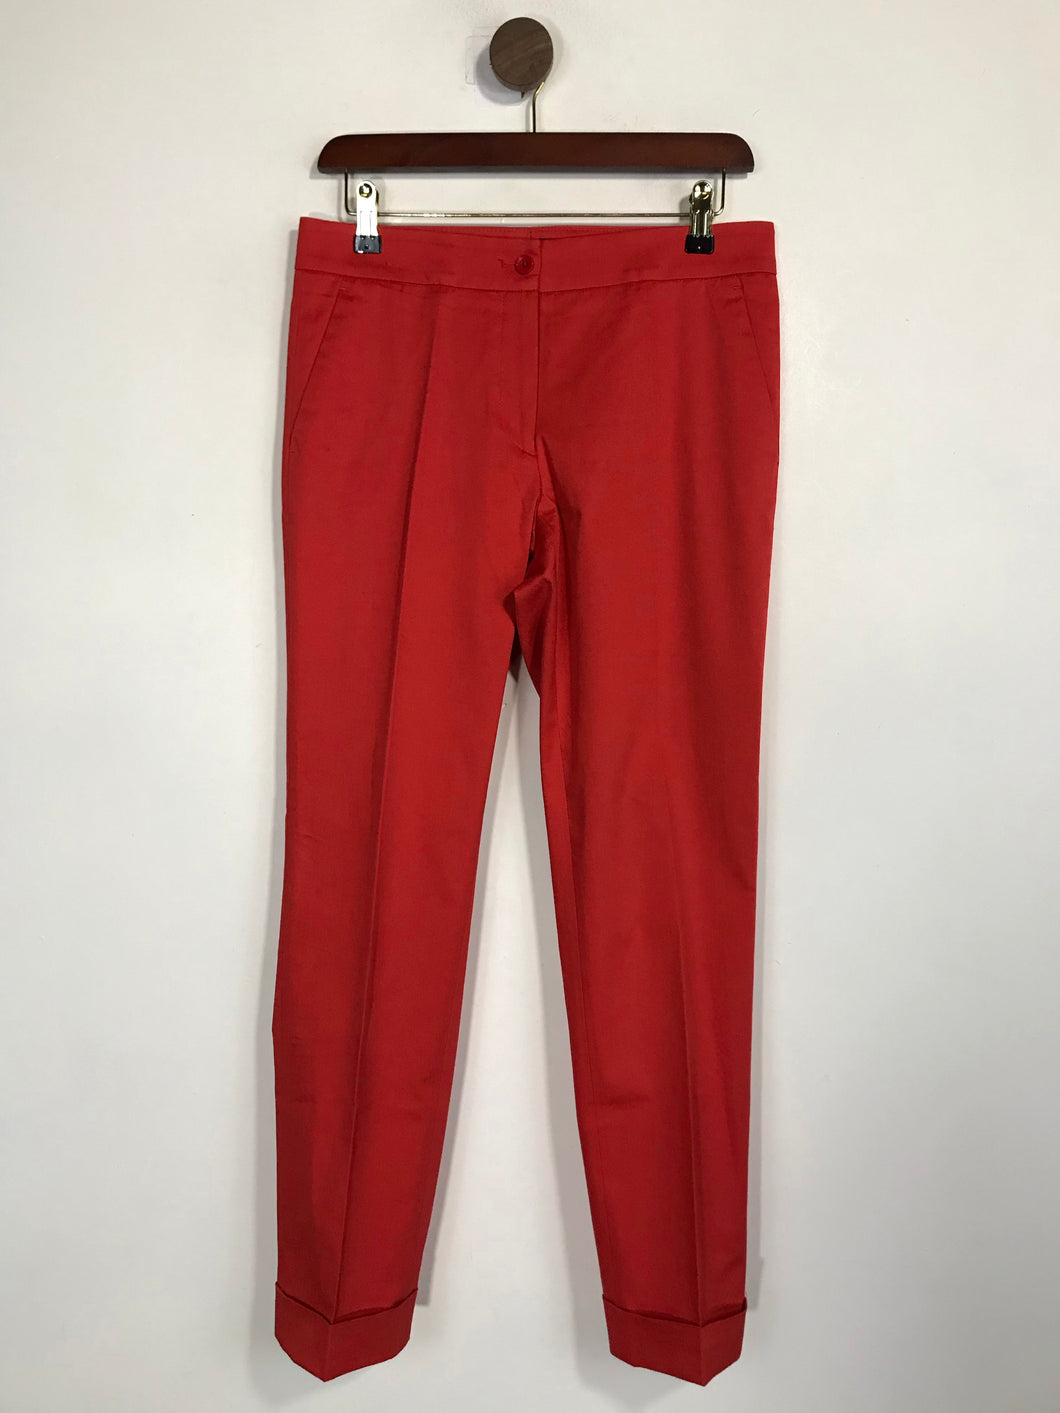 Etro 40 Women's Chinos Trousers | W29 UK10-12 | Red